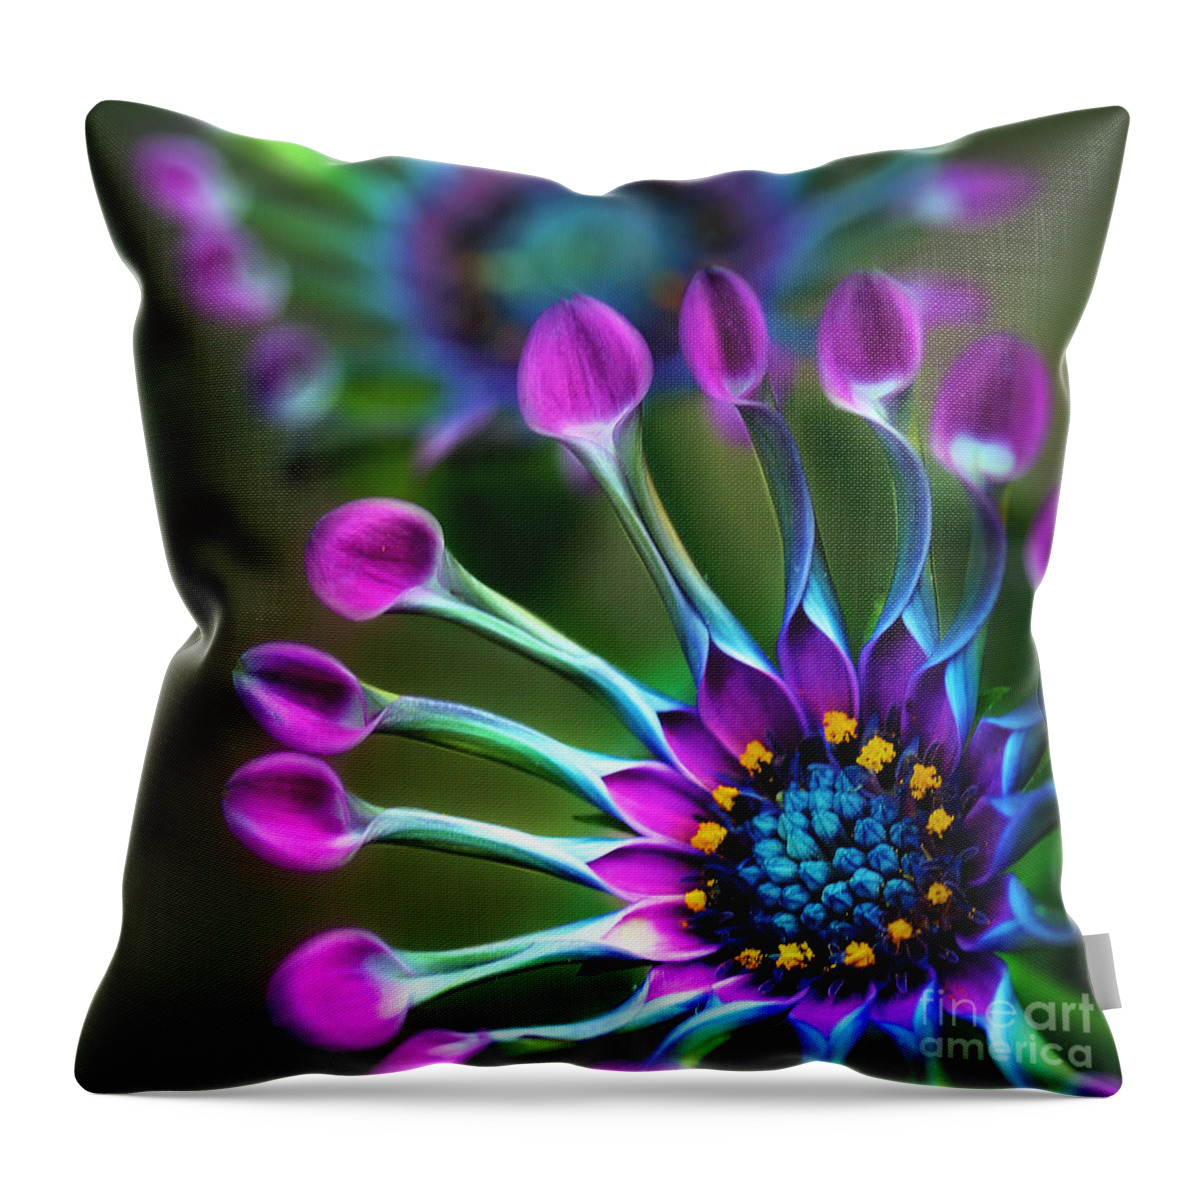 Kaleidoscope Throw Pillow featuring the photograph Whirligig by Judi Bagwell